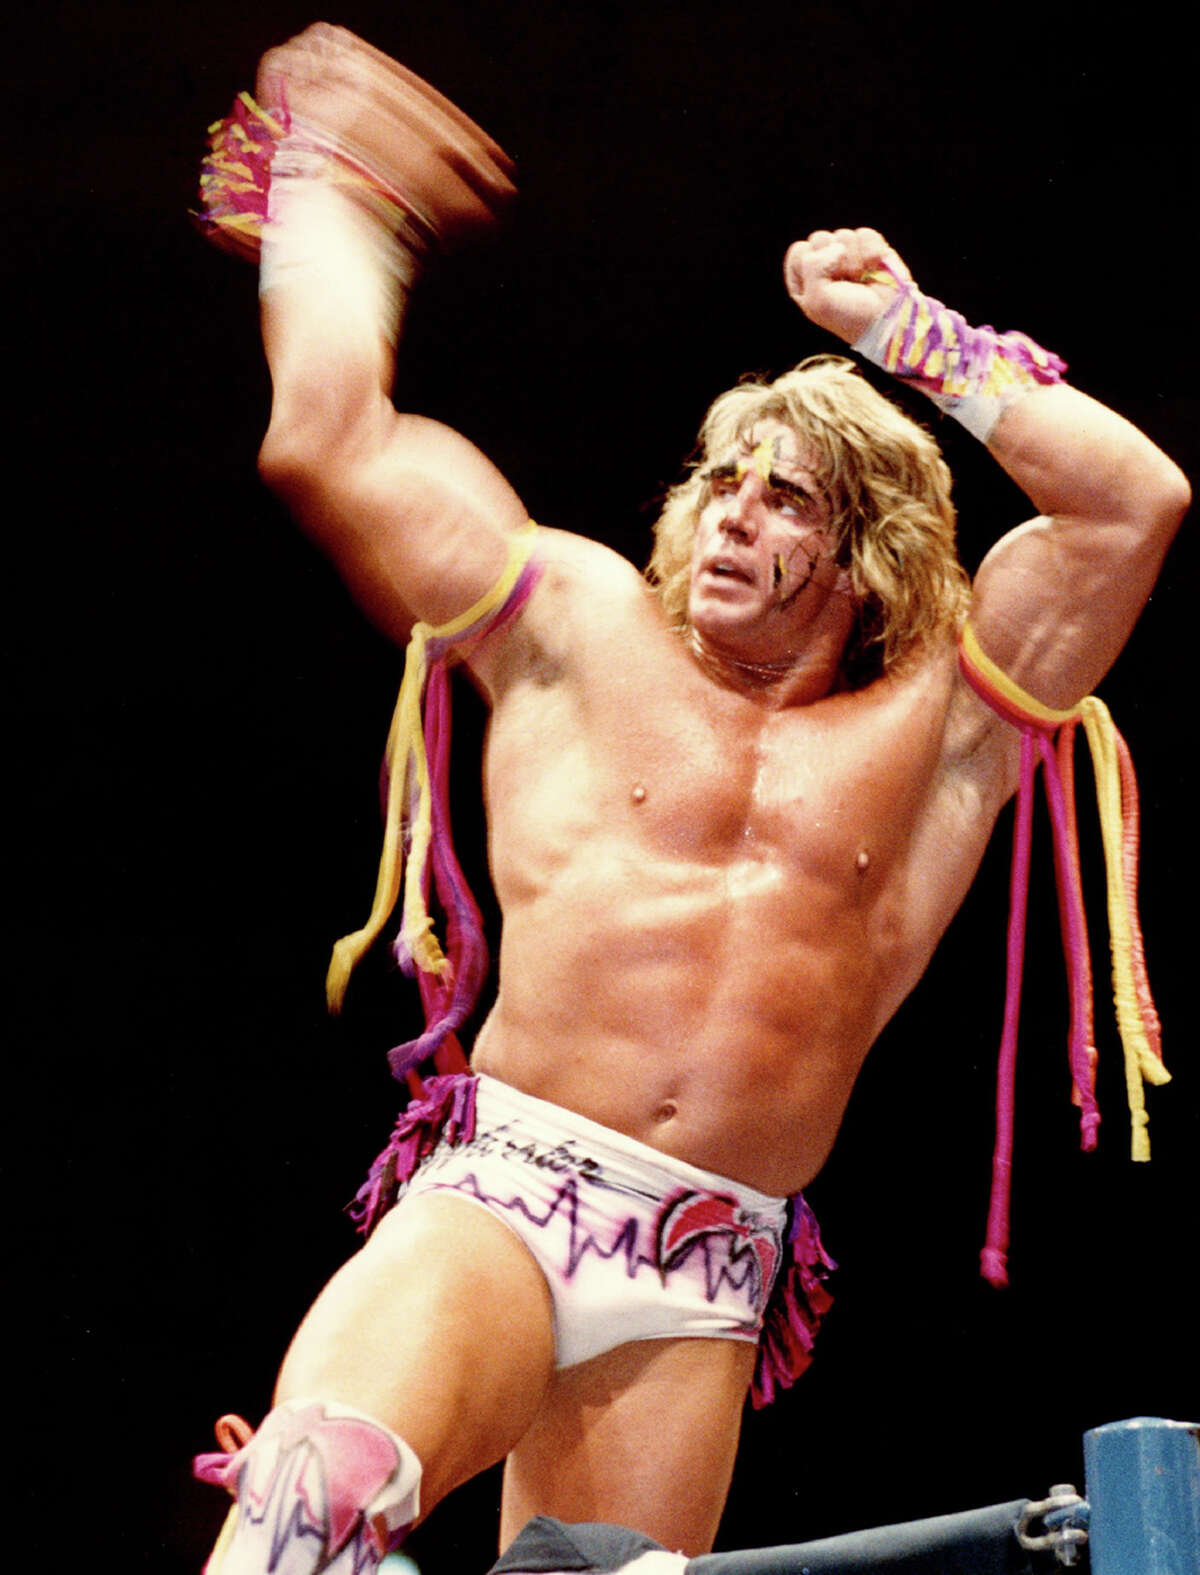 The Ultimate Warrior was a big WWE star in the '80s and '90s. He reportedly retired from wrestling in 1999.